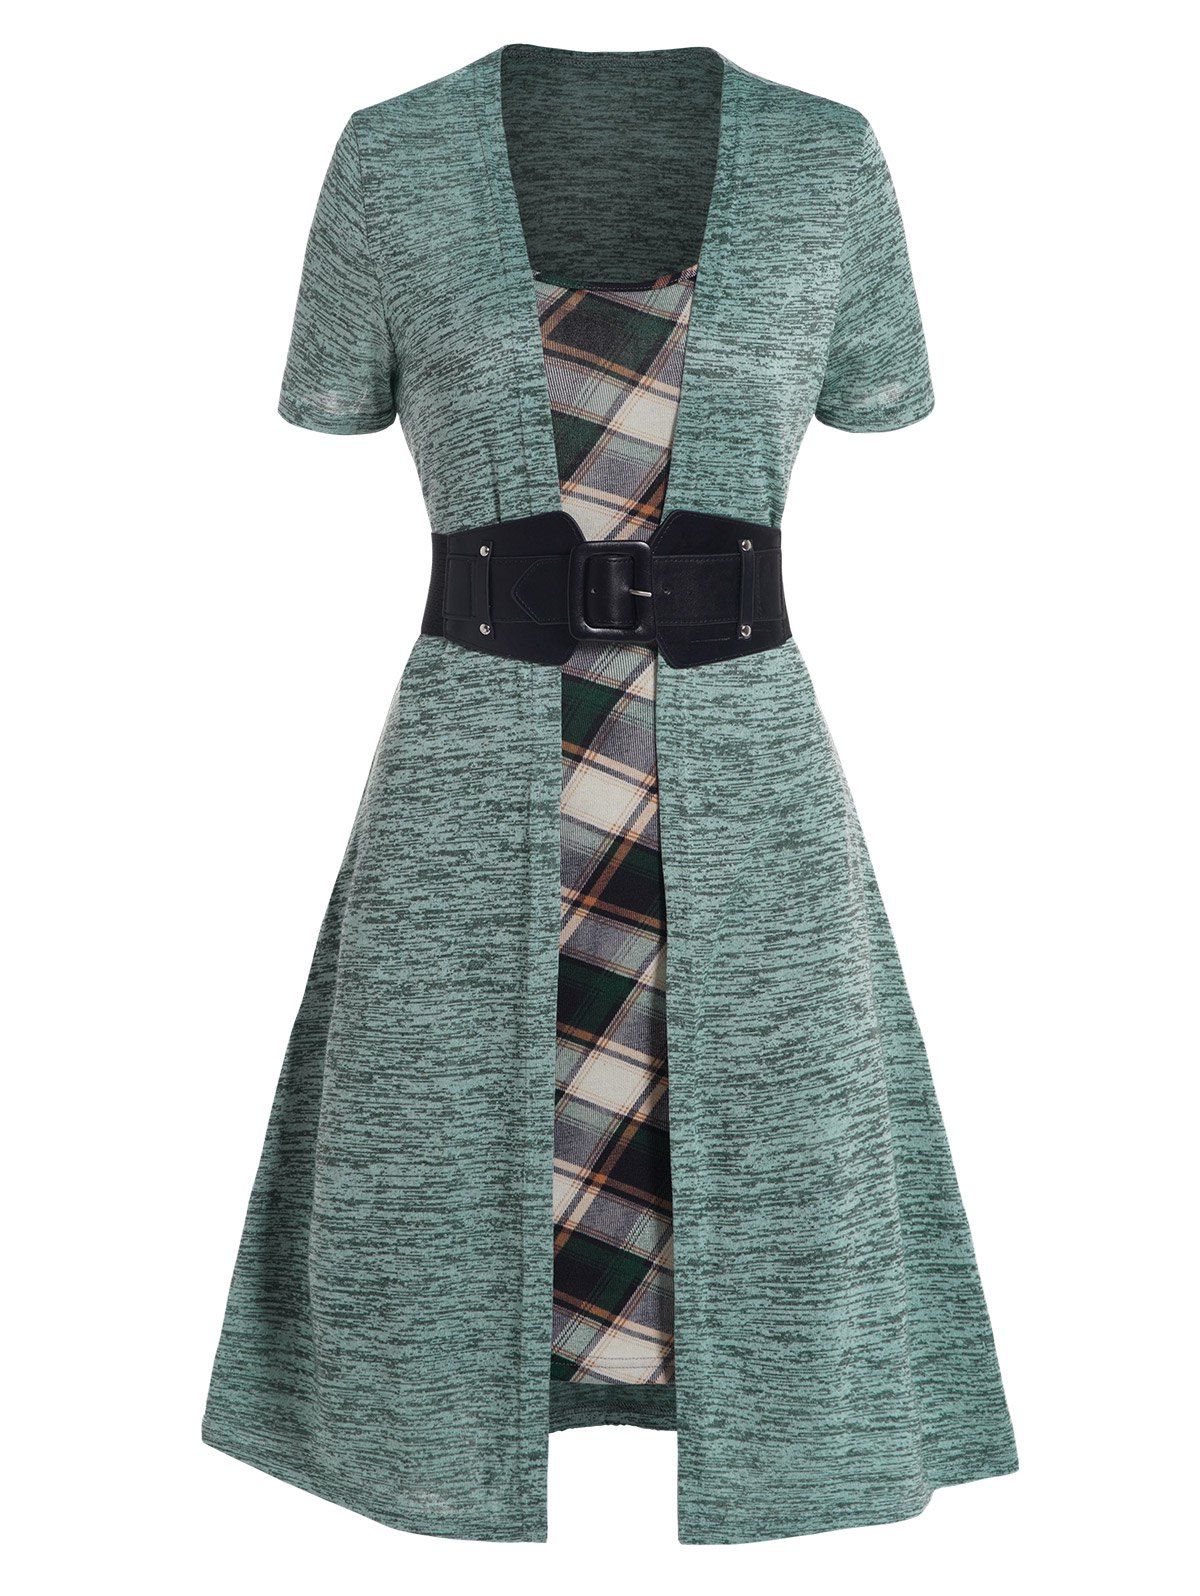 Space Dye Plaid Print Panel Faux Twinset Dress Belted High Waisted A Line Mini Twofer Dress - GREEN XXL